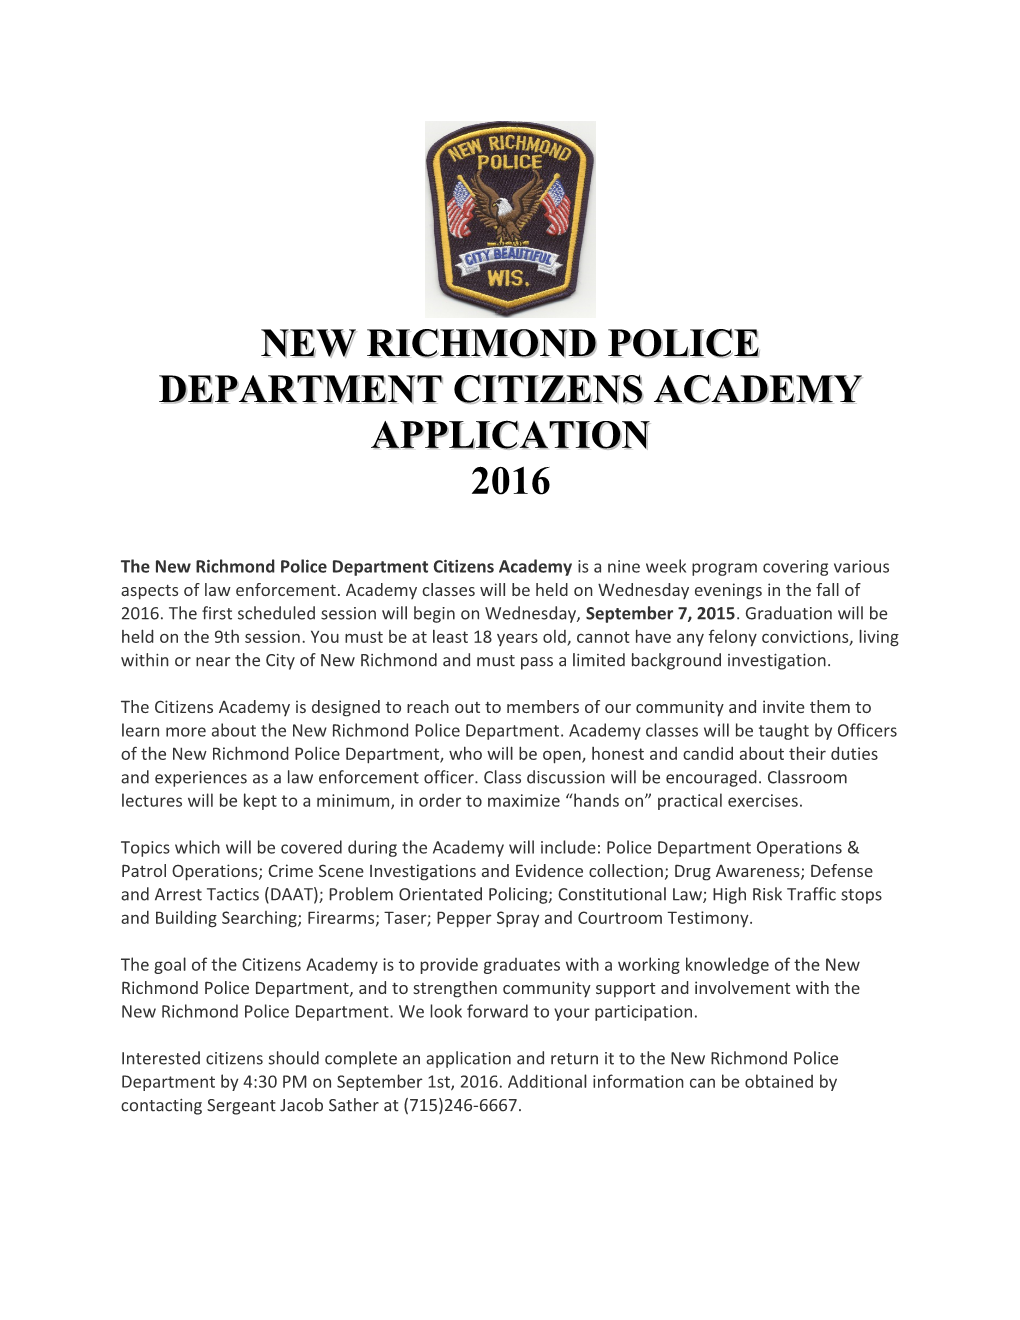 New Richmond Police Department Citizens Academy Application